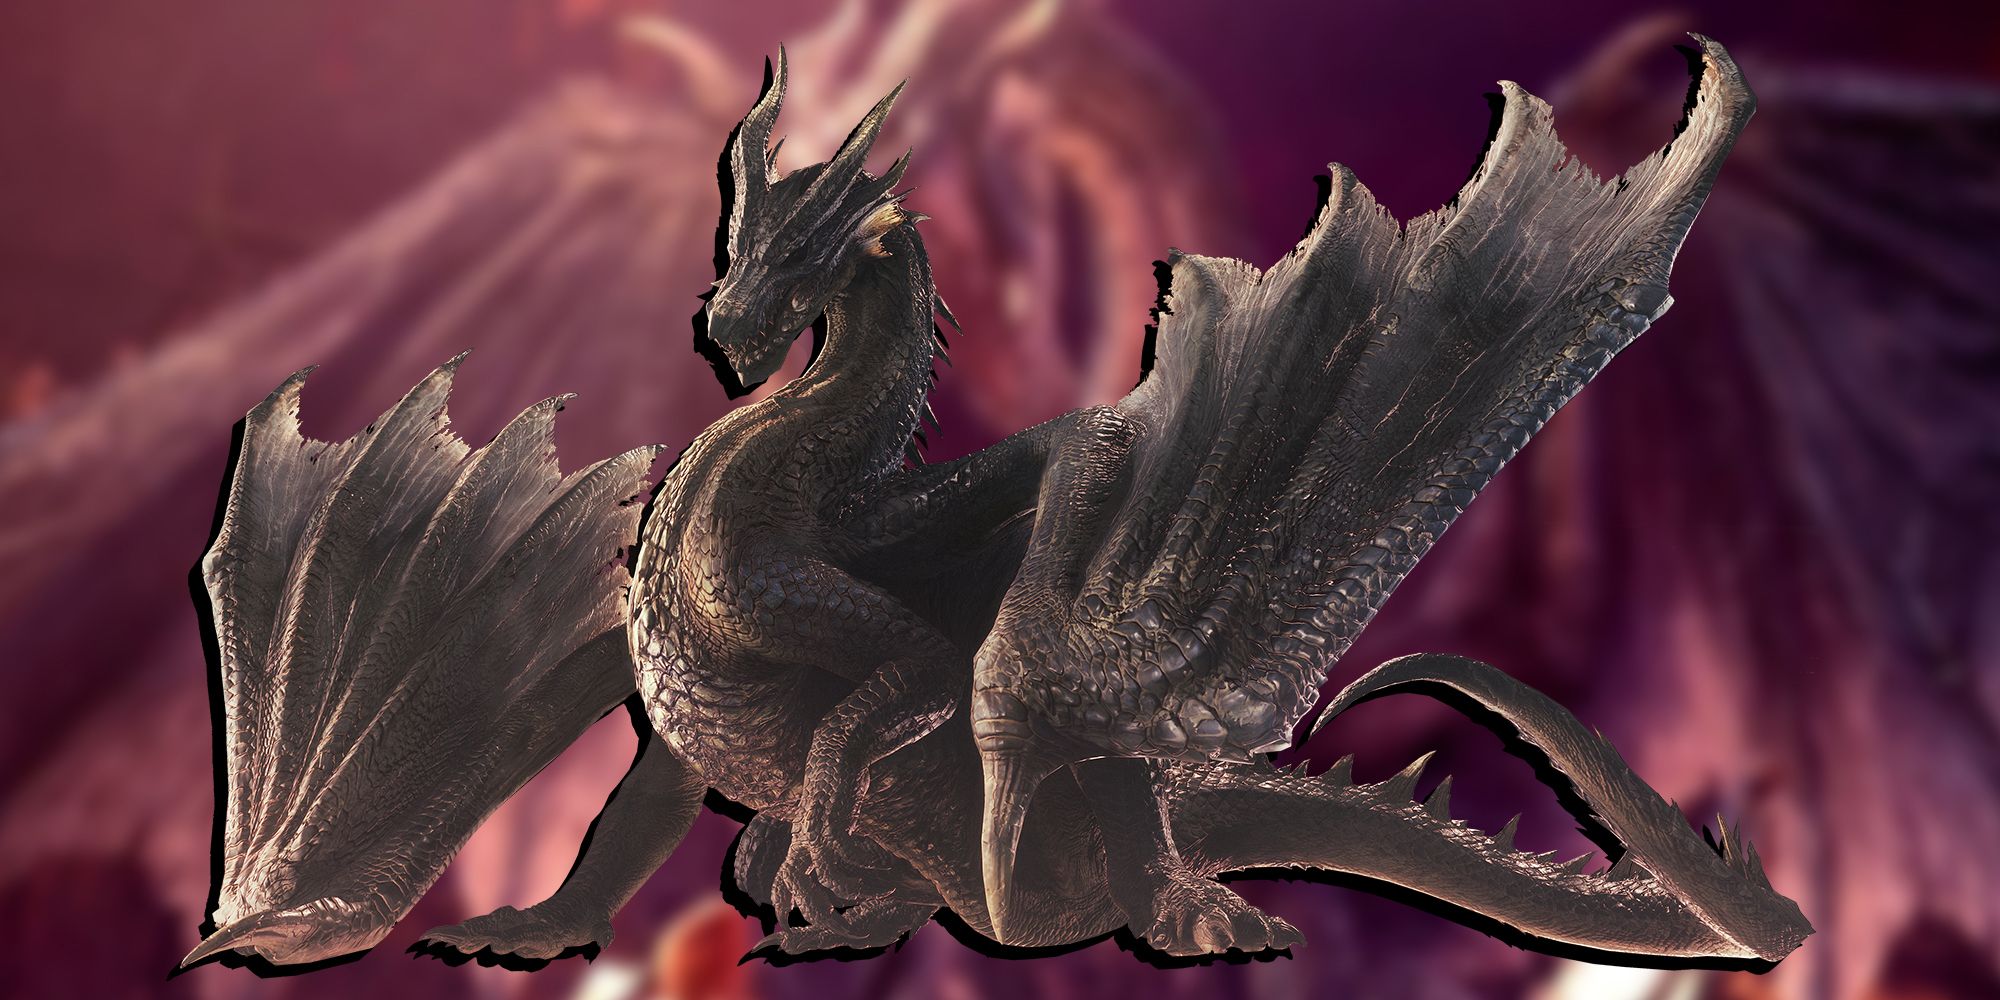 PNG Of Fatalis Overlaid On Image Of Fatalis In Its Introduction Cutscene Within The Iceborne Expansion